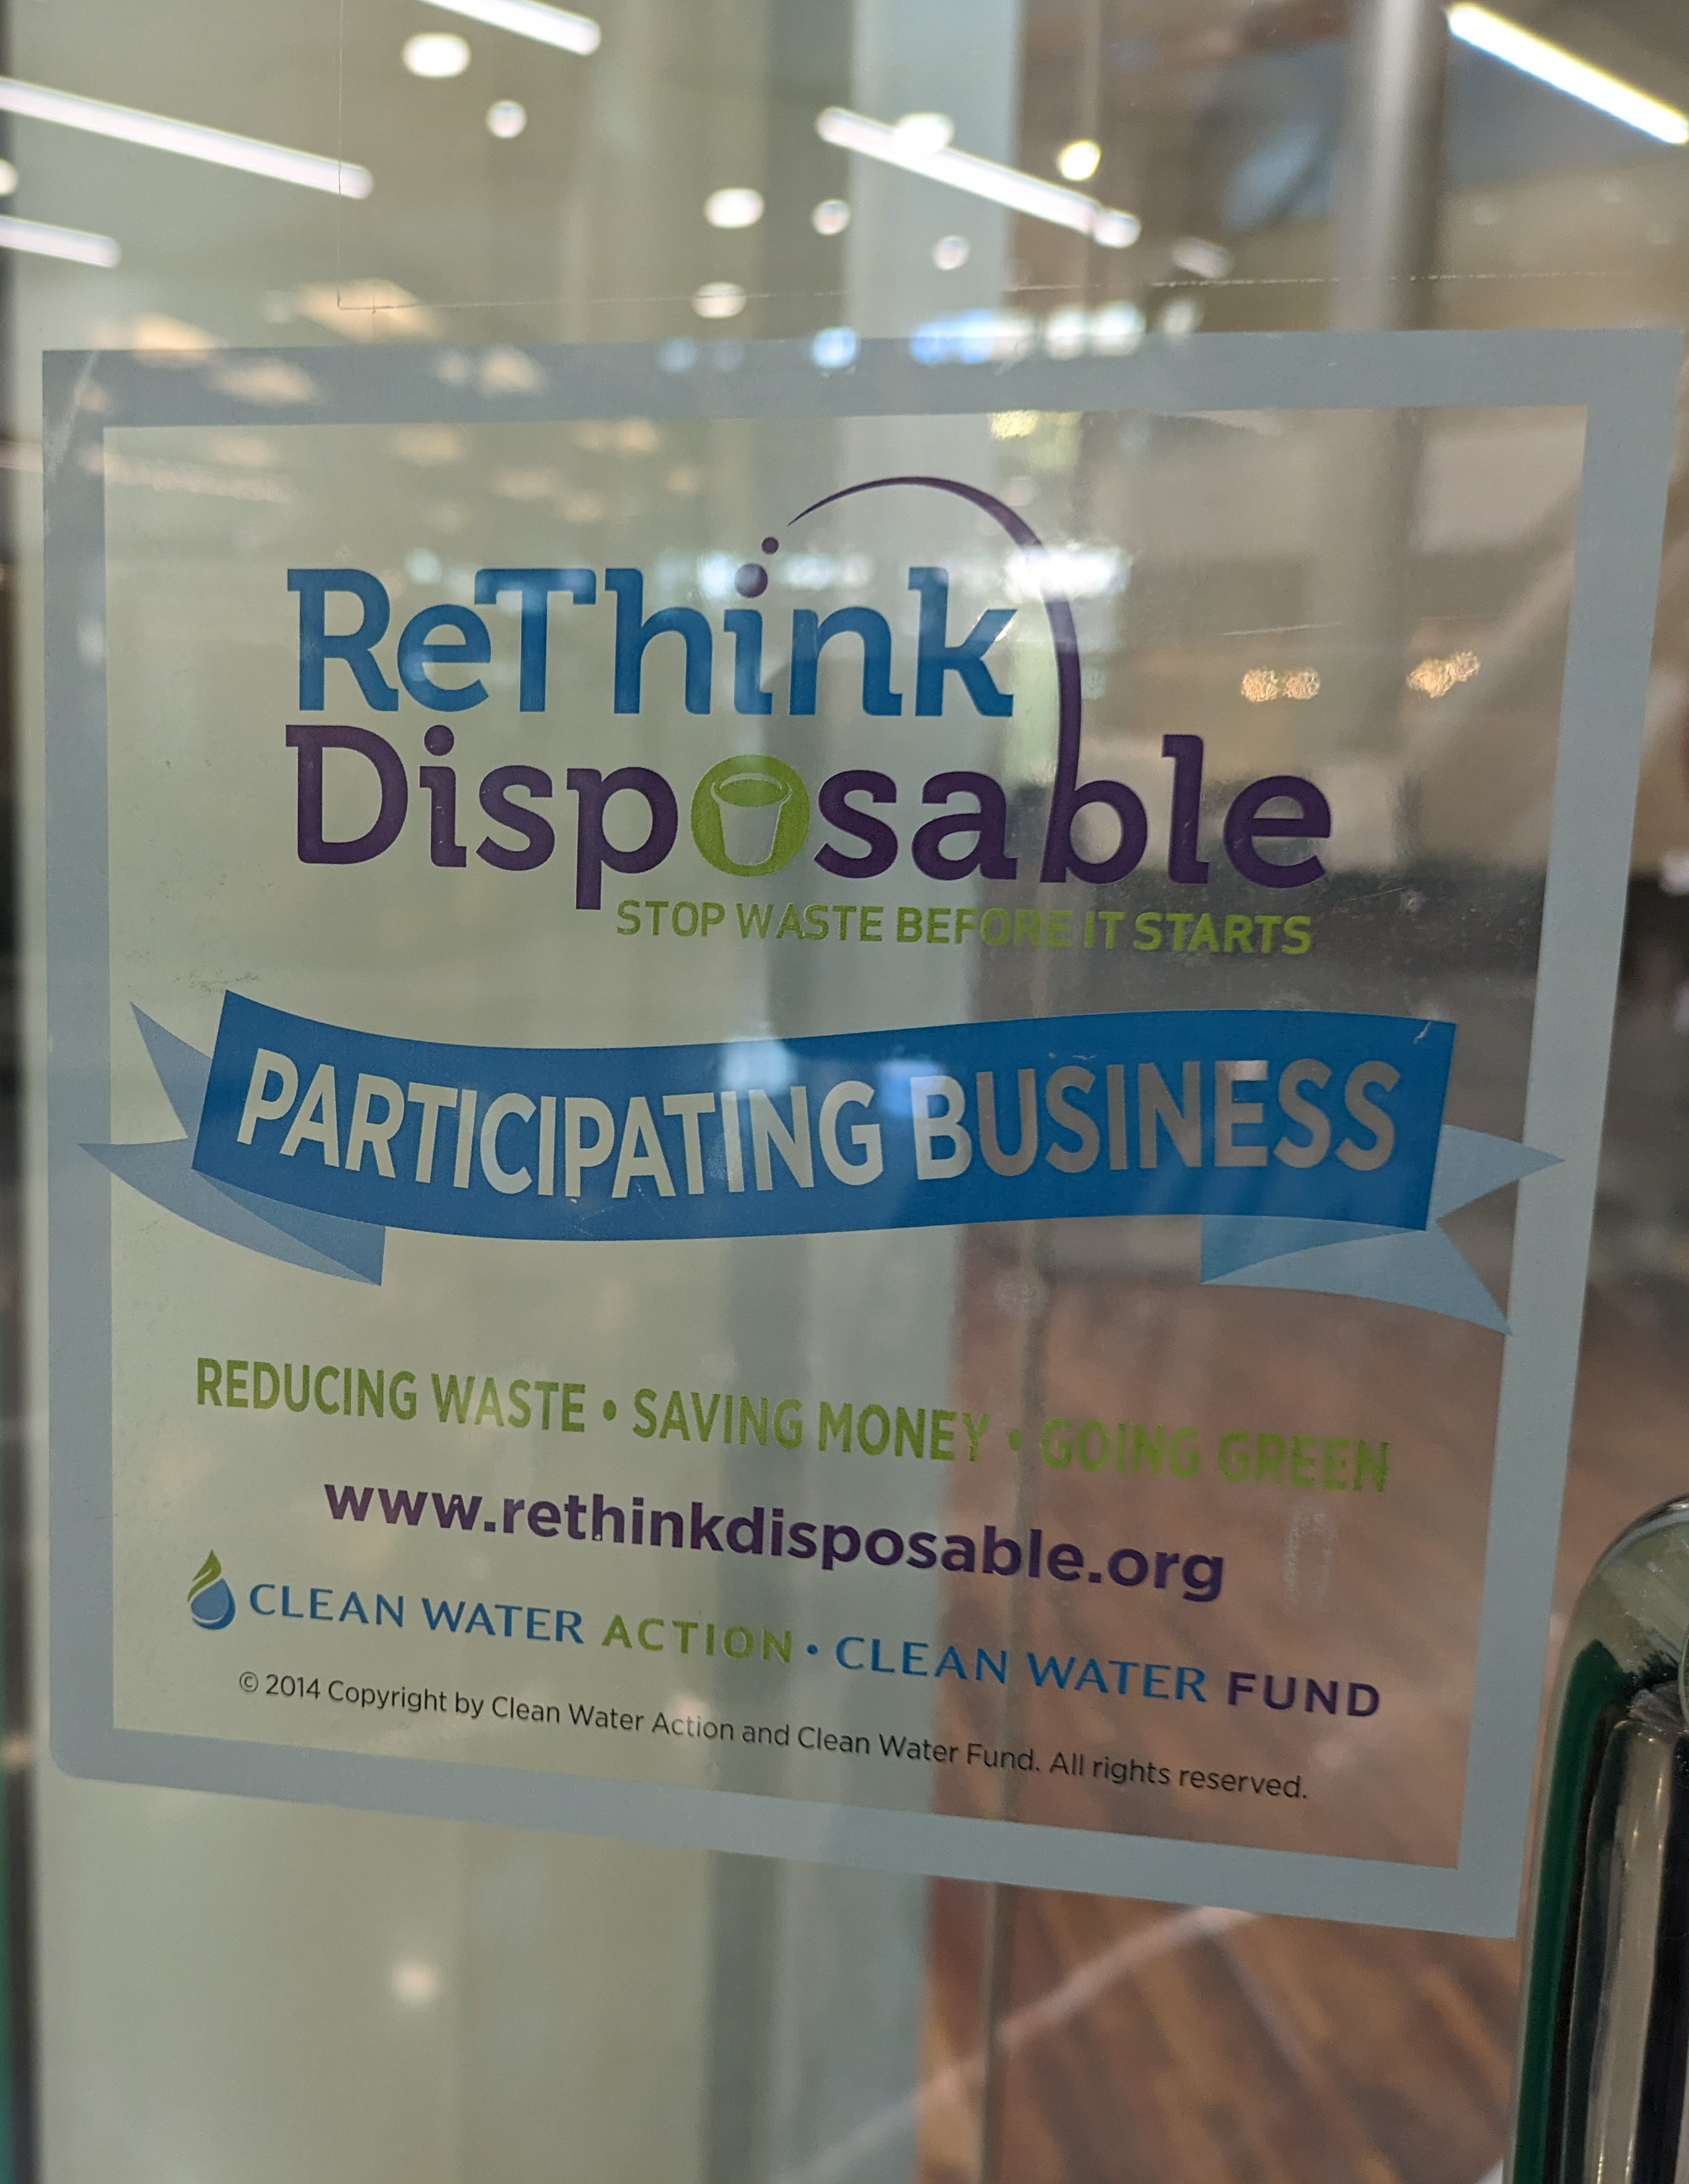 ReThink Disposable Participating Businesses sign, Valentino Cafe Minneapolis